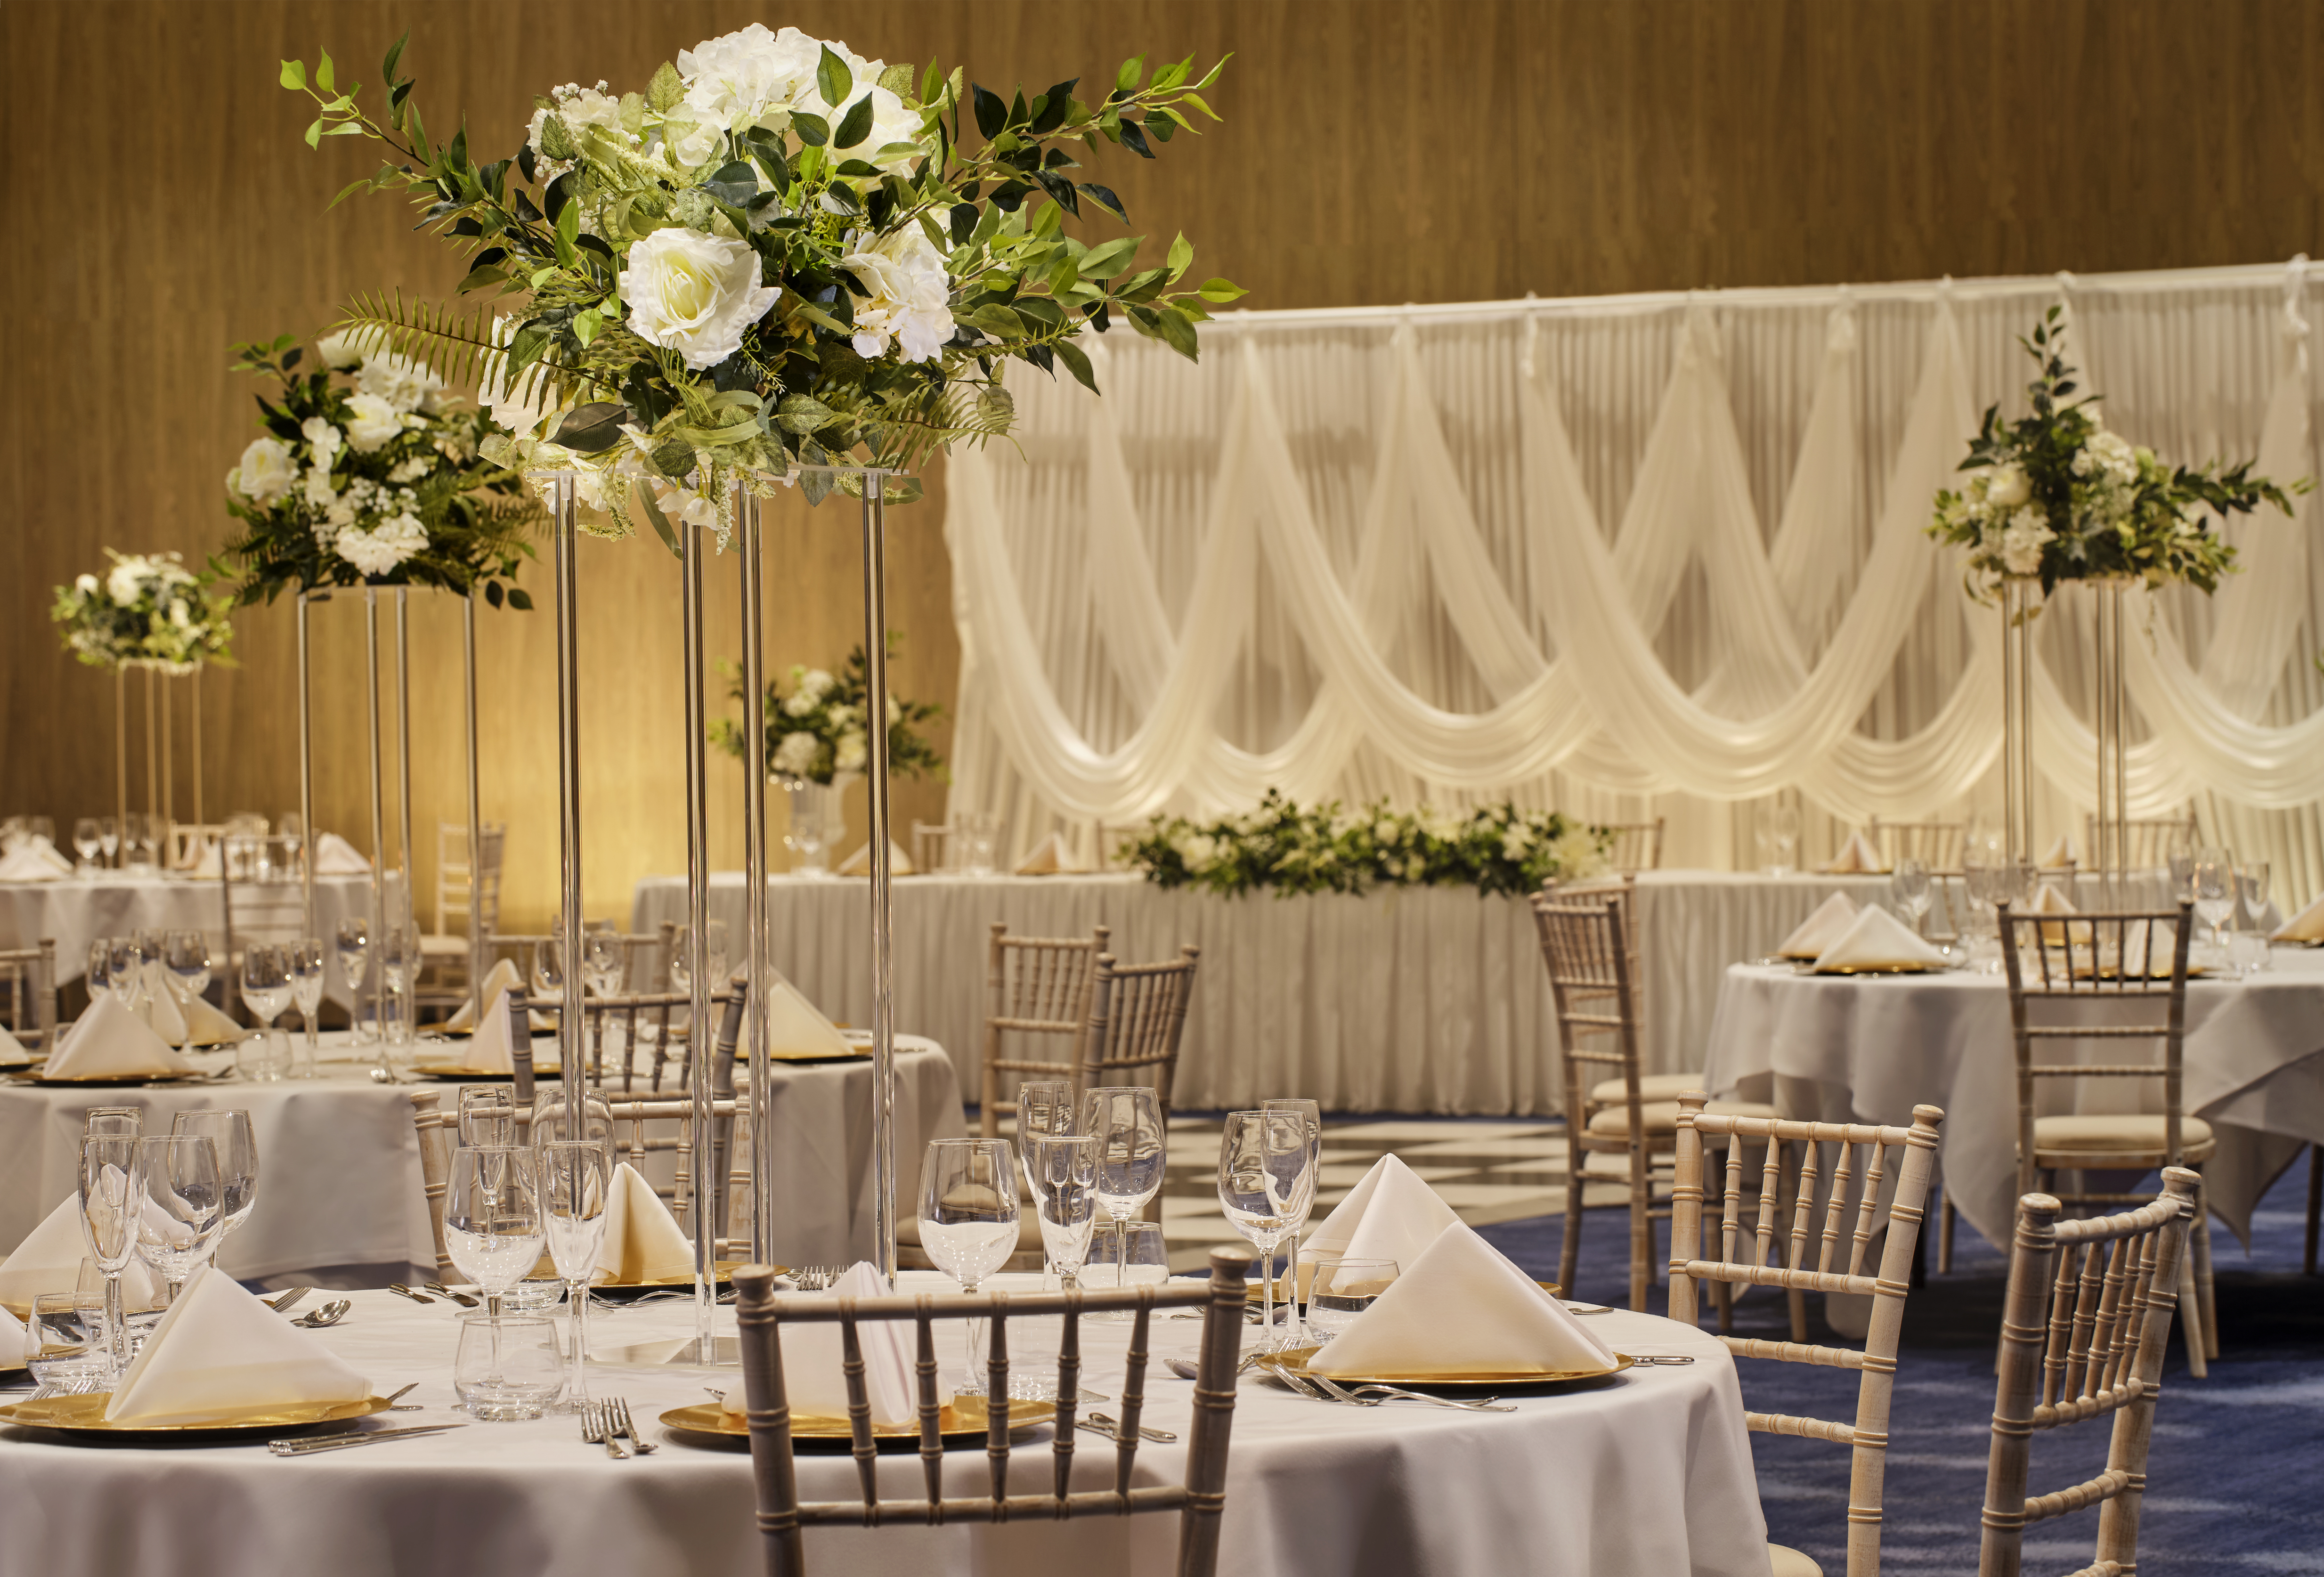 wedding reception setup in ballroom with round tables